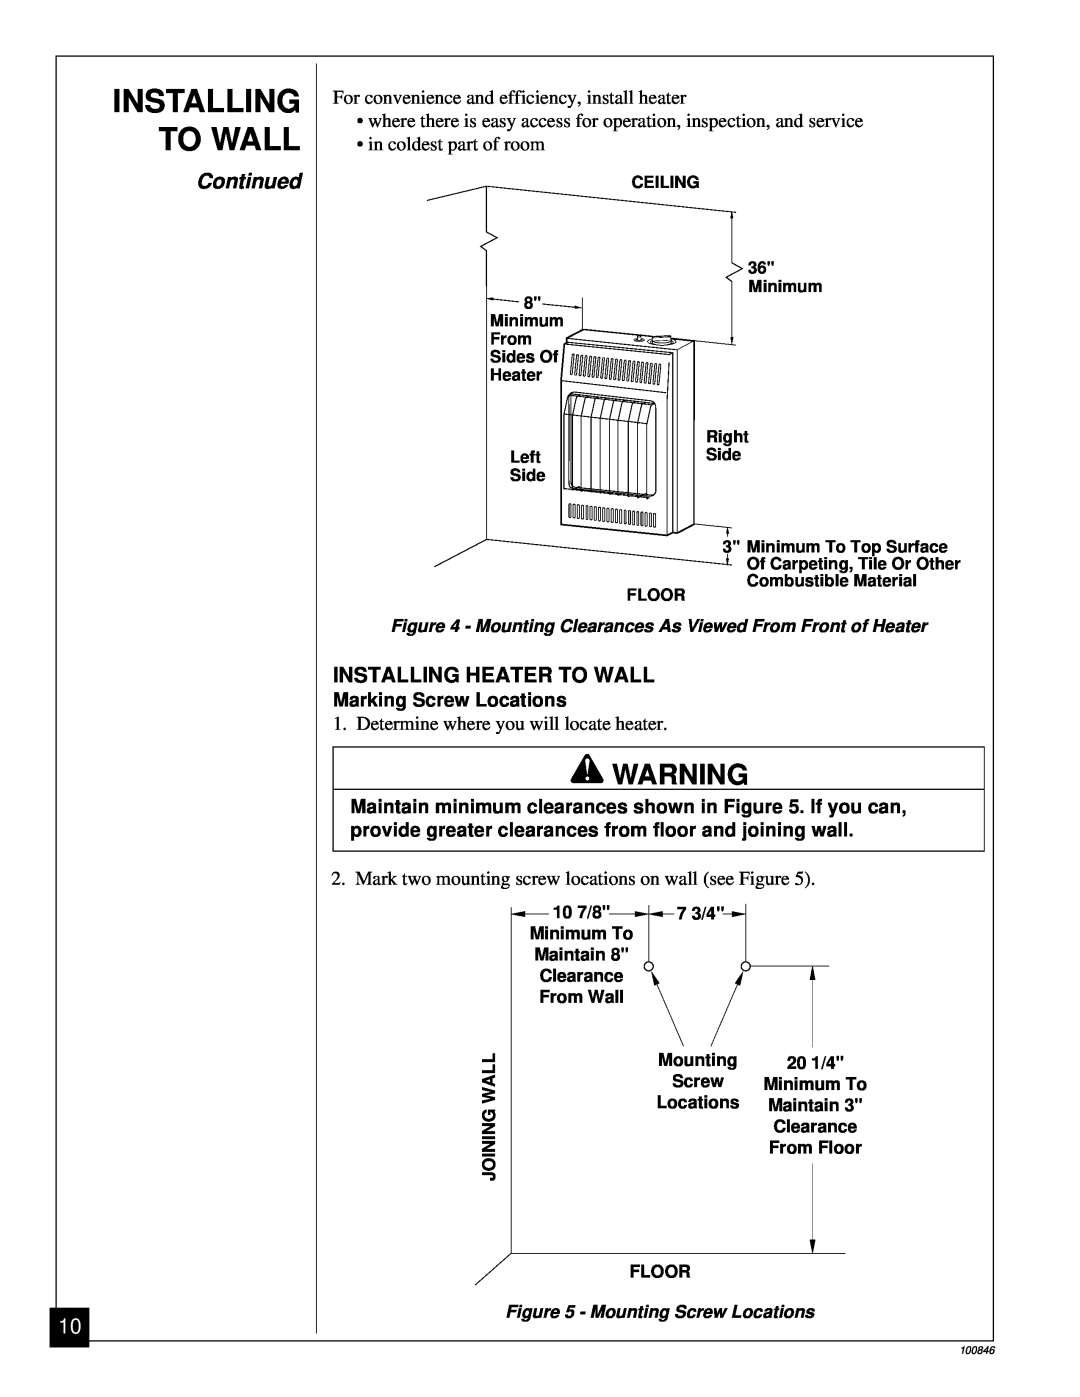 Desa CGP11A installation manual Installing To Wall, Continued, Installing Heater To Wall, Mounting Screw Locations 